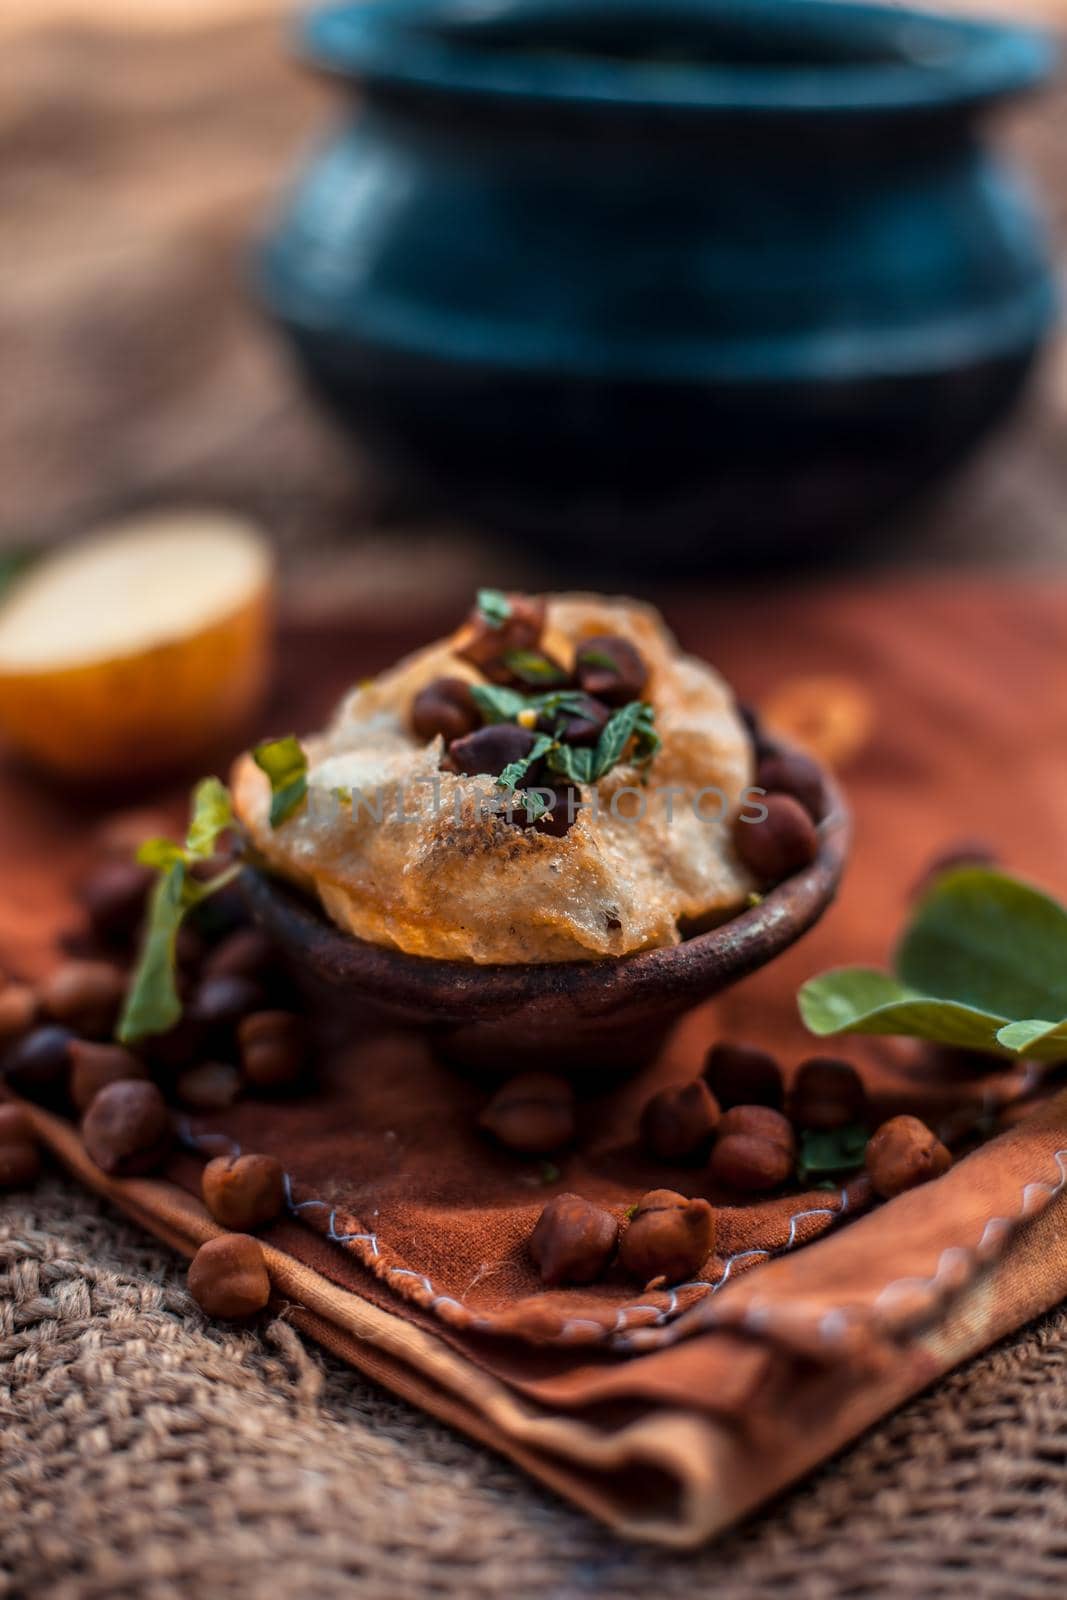 Famous Indian & Asian street food dish i.e. Golgappa snack in a clay bowl along with its flavored spicy water in another clay vessel. Vertical shot of the snack and its ingredients present. by mirzamlk